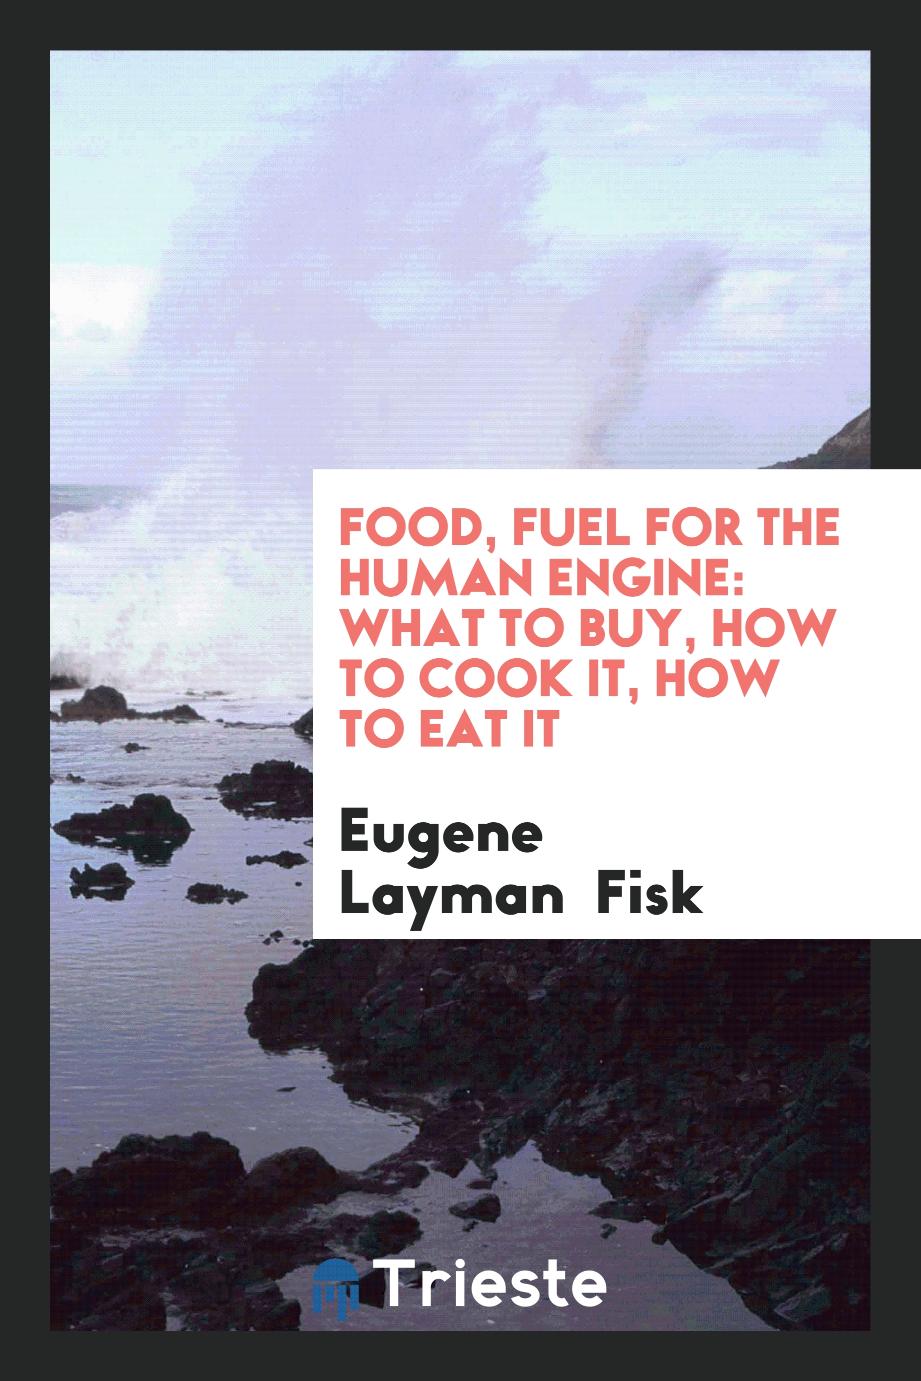 Food, Fuel for the Human Engine: What to Buy, how to Cook It, how to Eat it